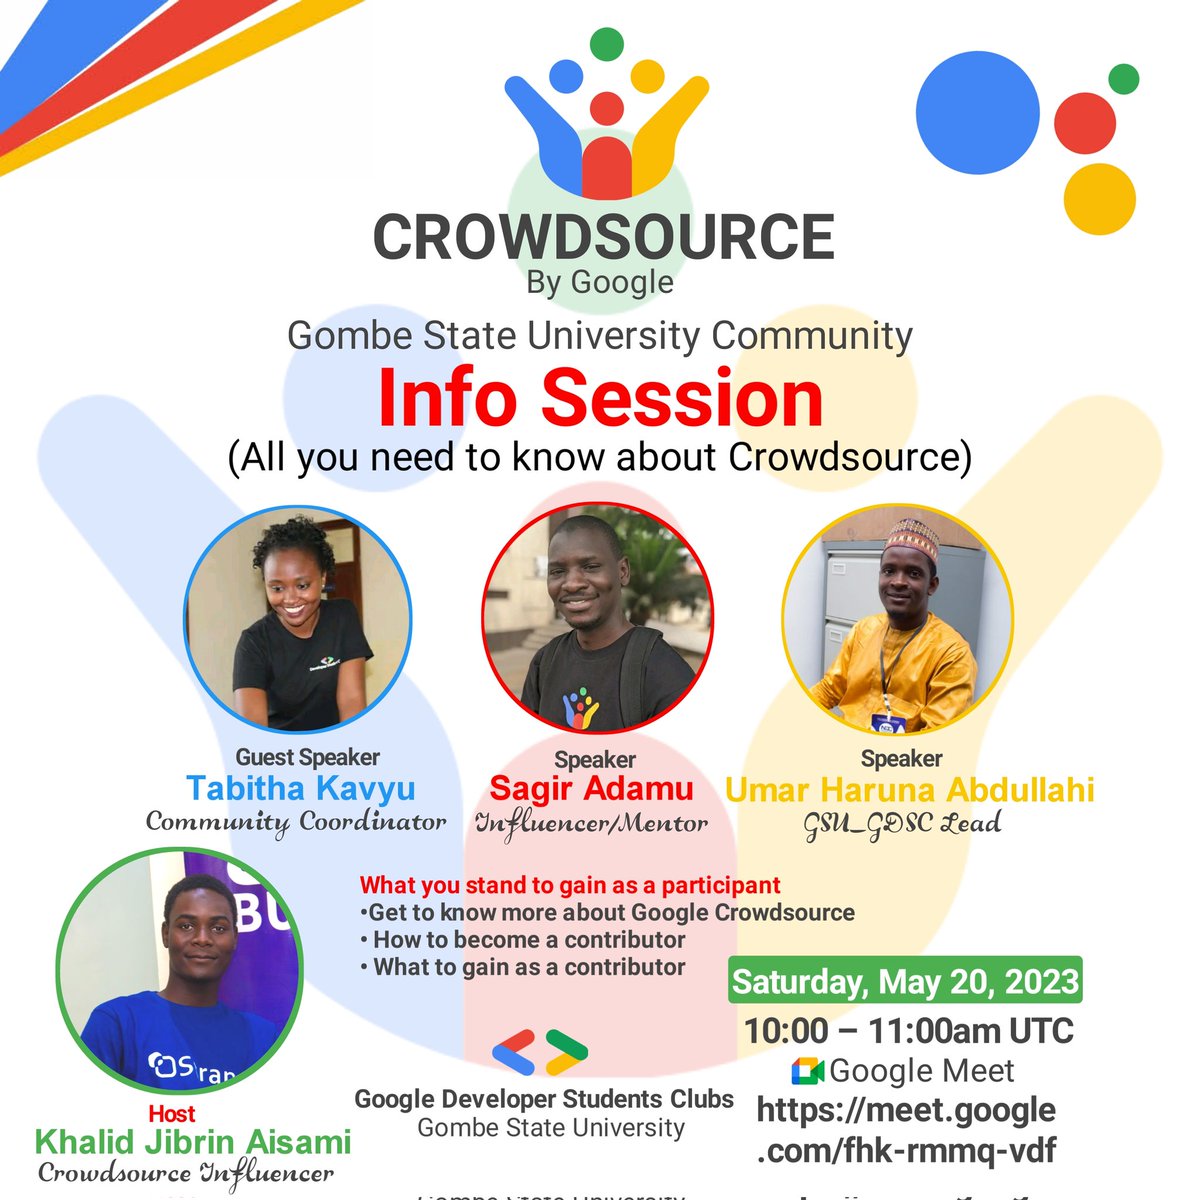 I'm very excited to announce my first event as a Google Crowdsource Influencer.
(All you to know about Crowdsource)
Date: Saturday 20, May 2023
Time:10:00am
Google Meet 
Video link: meet.google.com/fhk-rmmq-vdf
@TabithaKavyu
@varma_aish
@Sagiru_ss